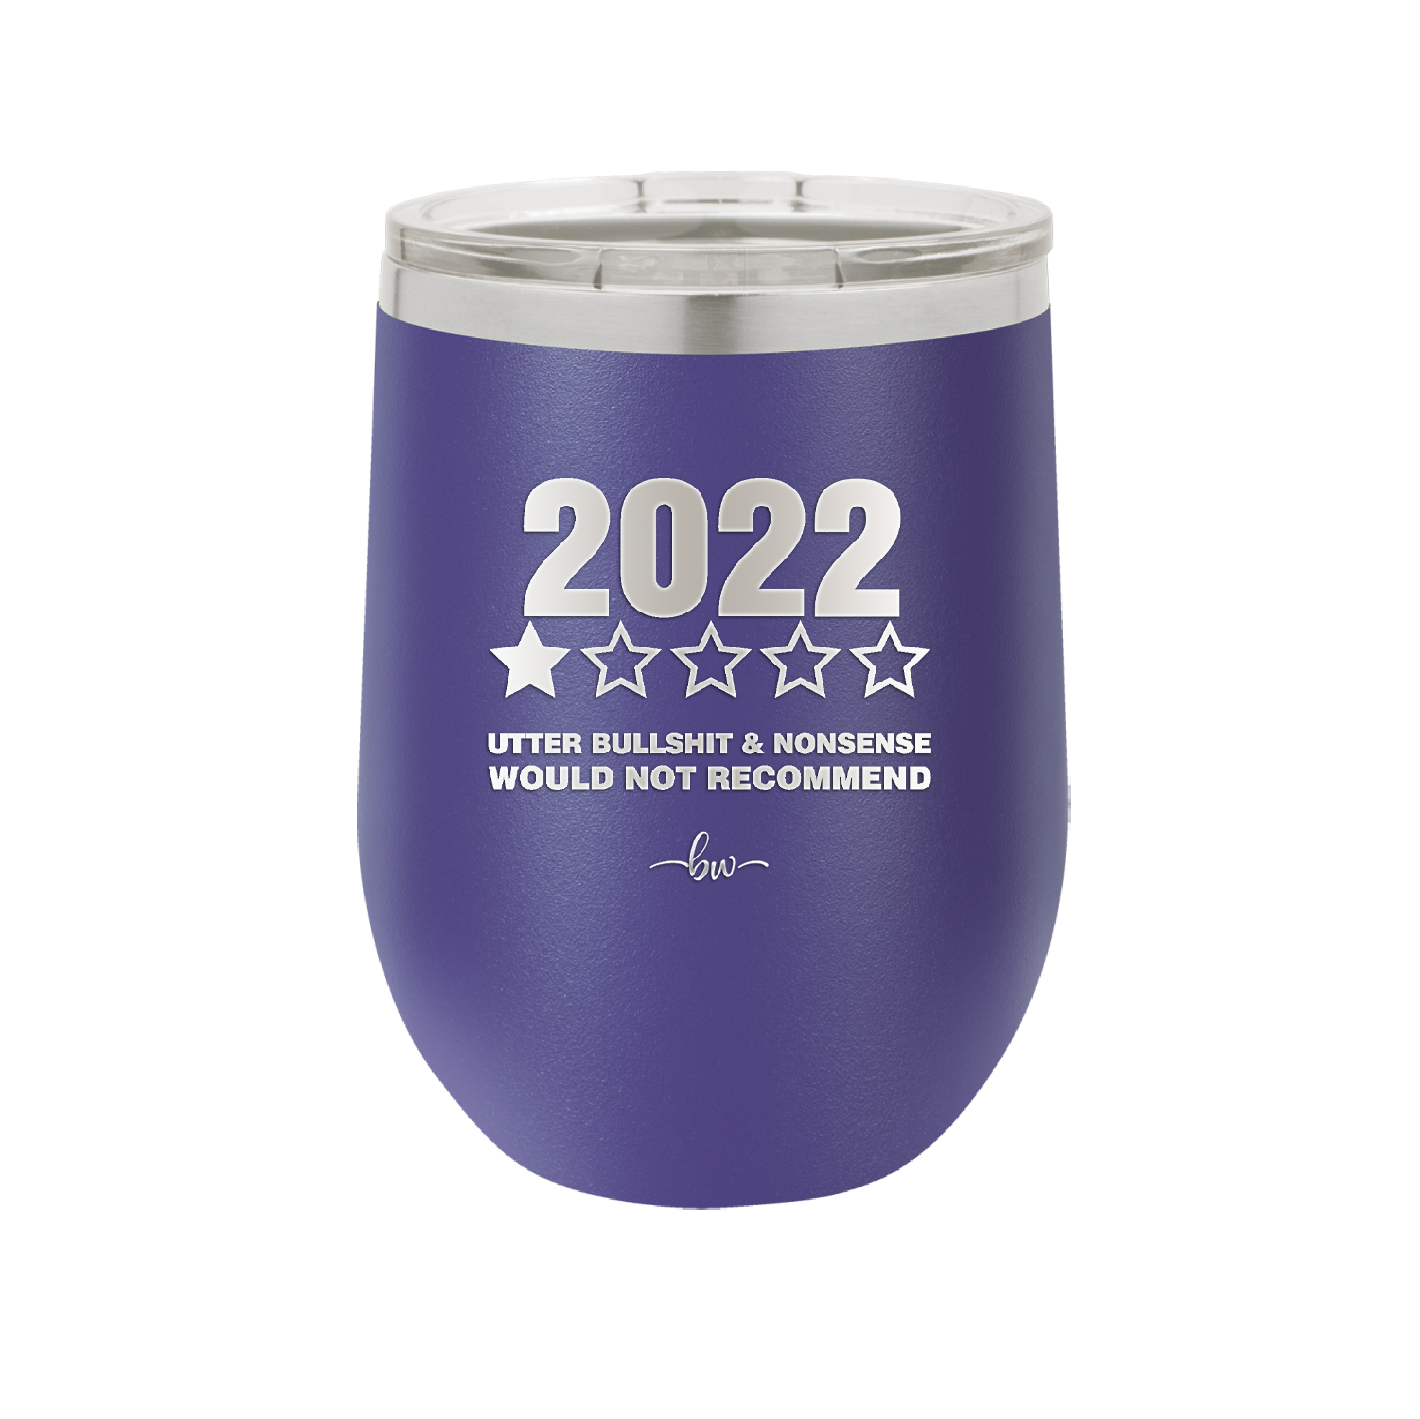 12 oz wine cup 2022 utter bullshitt and nonsense would not recommend - purple